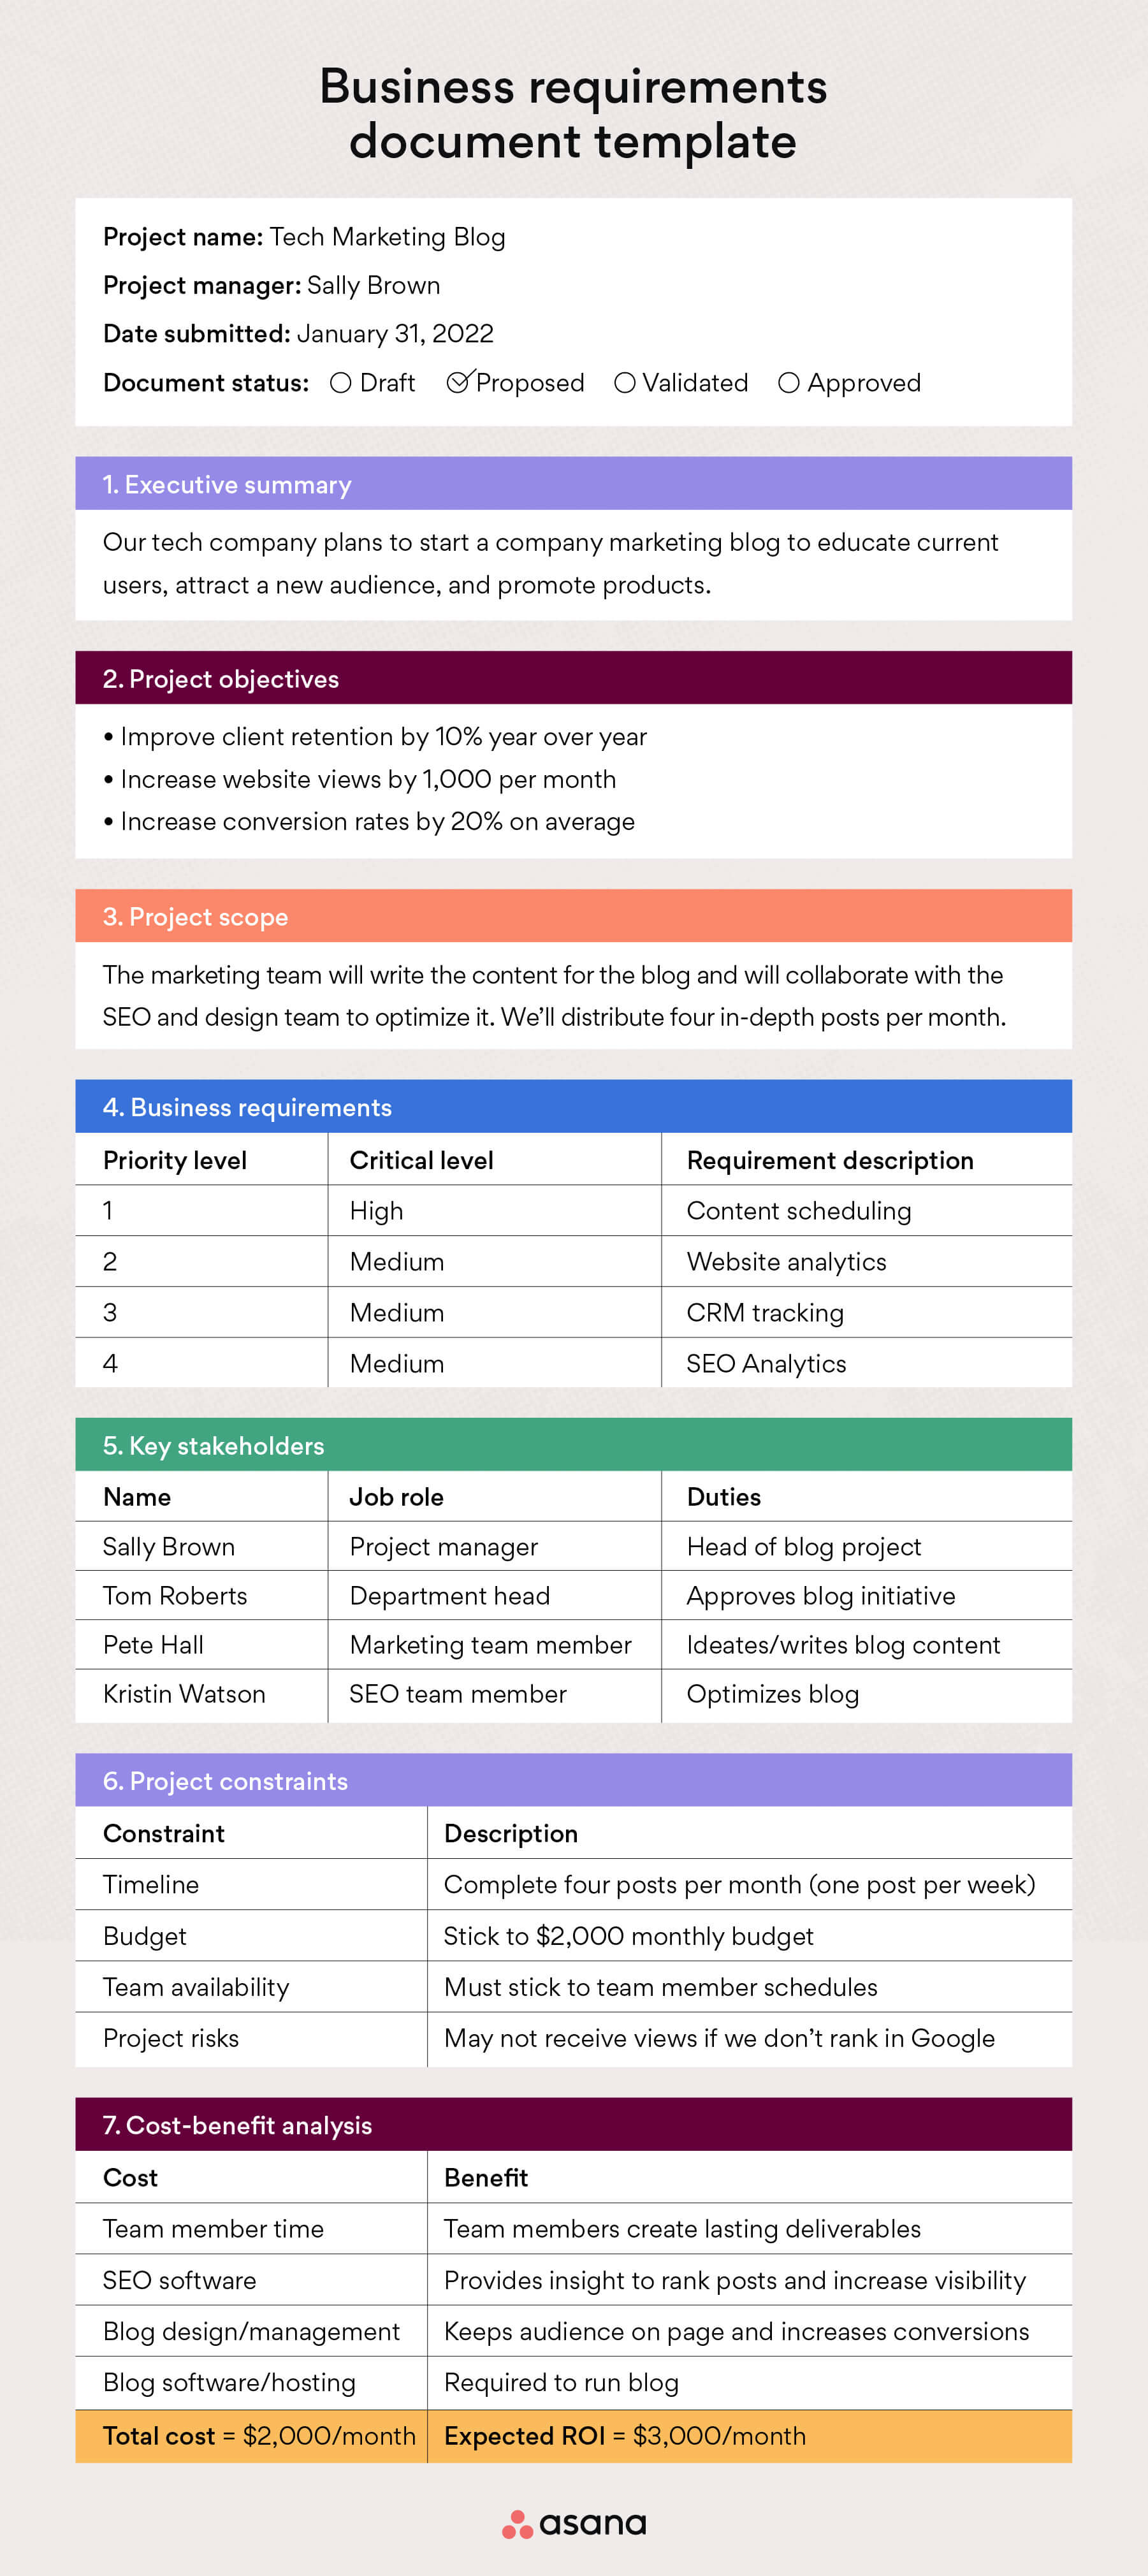 Business requirements document template example